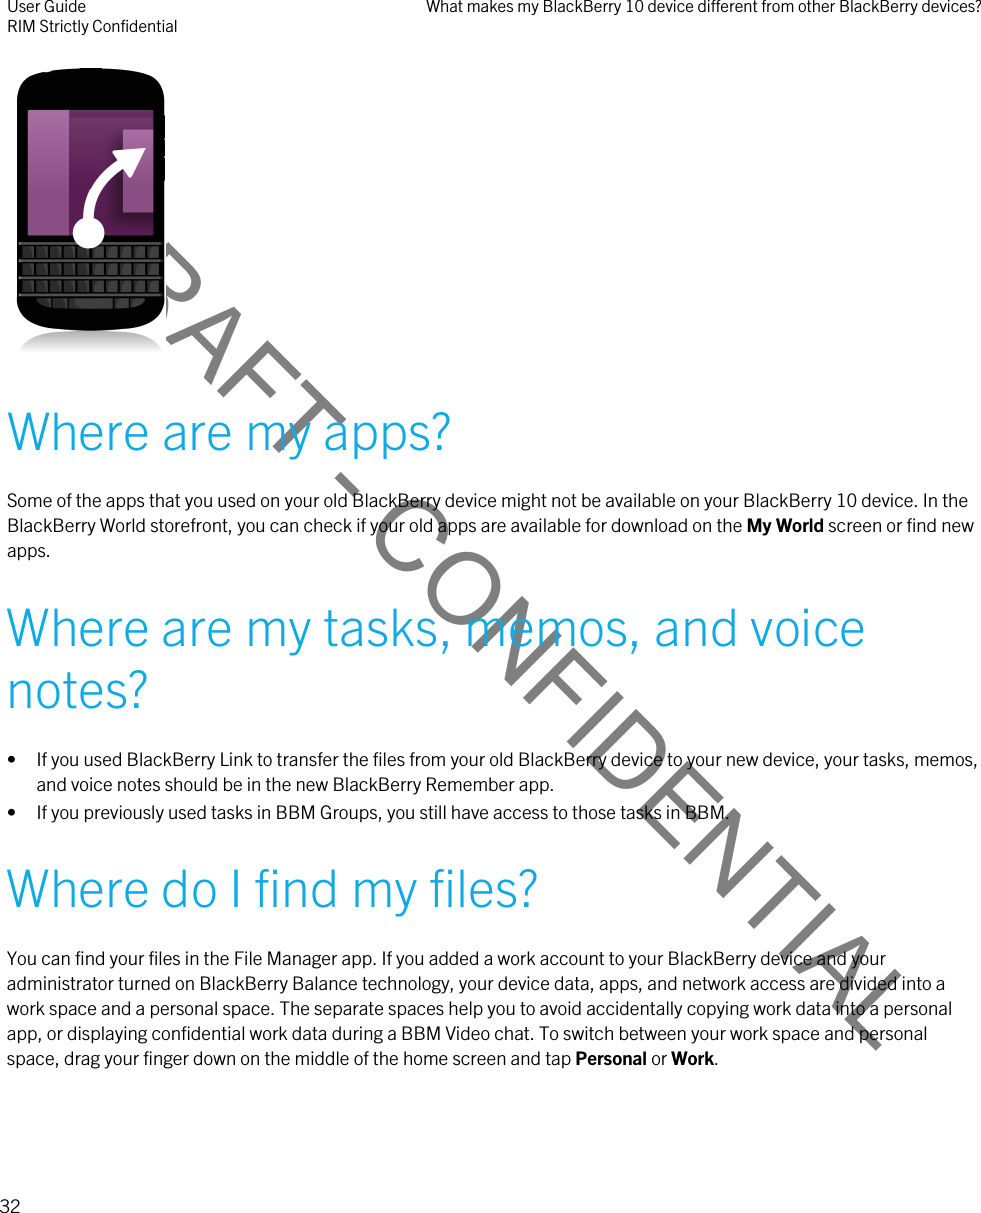 DRAFT - CONFIDENTIAL Where are my apps?Some of the apps that you used on your old BlackBerry device might not be available on your BlackBerry 10 device. In the BlackBerry World storefront, you can check if your old apps are available for download on the My World screen or find new apps.Where are my tasks, memos, and voice notes?• If you used BlackBerry Link to transfer the files from your old BlackBerry device to your new device, your tasks, memos, and voice notes should be in the new BlackBerry Remember app.• If you previously used tasks in BBM Groups, you still have access to those tasks in BBM.Where do I find my files?You can find your files in the File Manager app. If you added a work account to your BlackBerry device and your administrator turned on BlackBerry Balance technology, your device data, apps, and network access are divided into a work space and a personal space. The separate spaces help you to avoid accidentally copying work data into a personal app, or displaying confidential work data during a BBM Video chat. To switch between your work space and personal space, drag your finger down on the middle of the home screen and tap Personal or Work.User GuideRIM Strictly Confidential What makes my BlackBerry 10 device different from other BlackBerry devices?32 